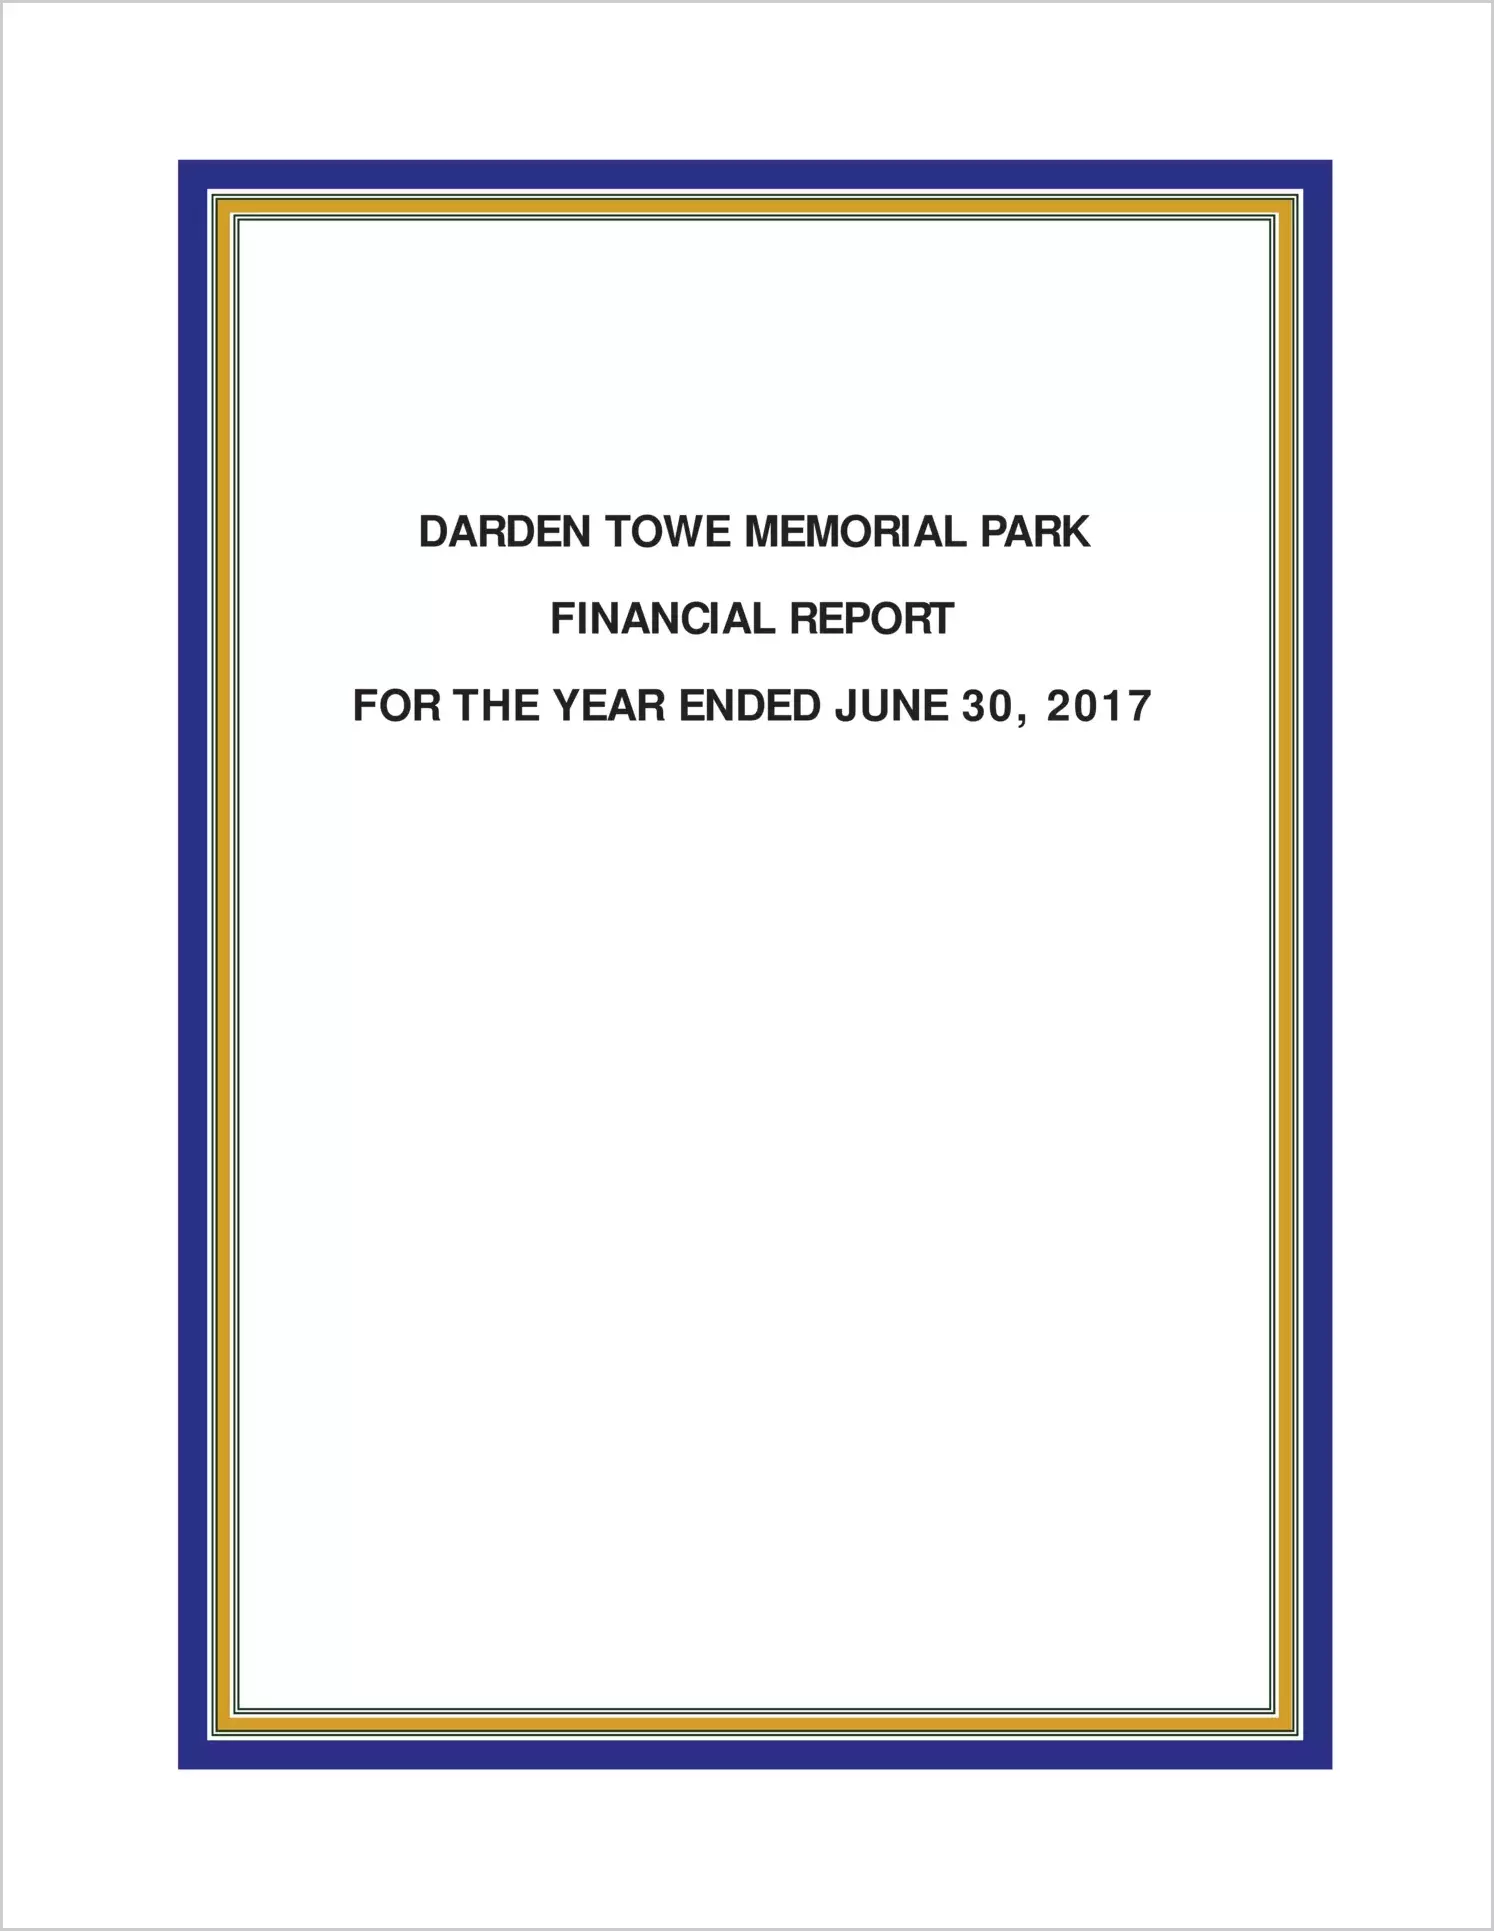 2017 ABC/Other Annual Financial Report  for Darden Towe Memorial Park